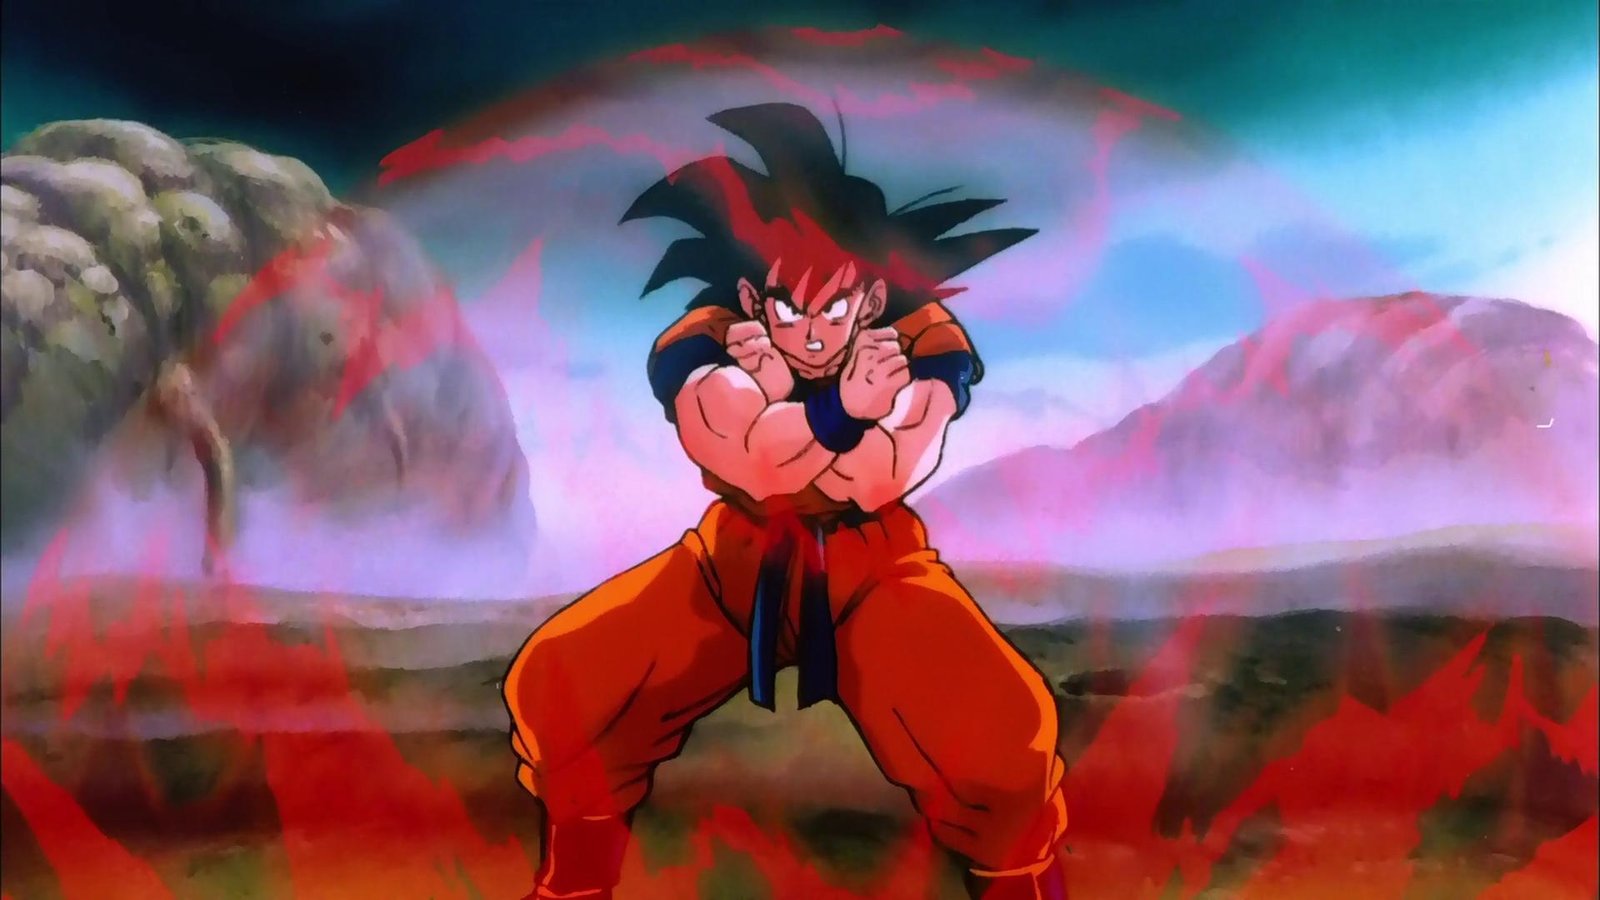  Dragon ball z The Tree of Might